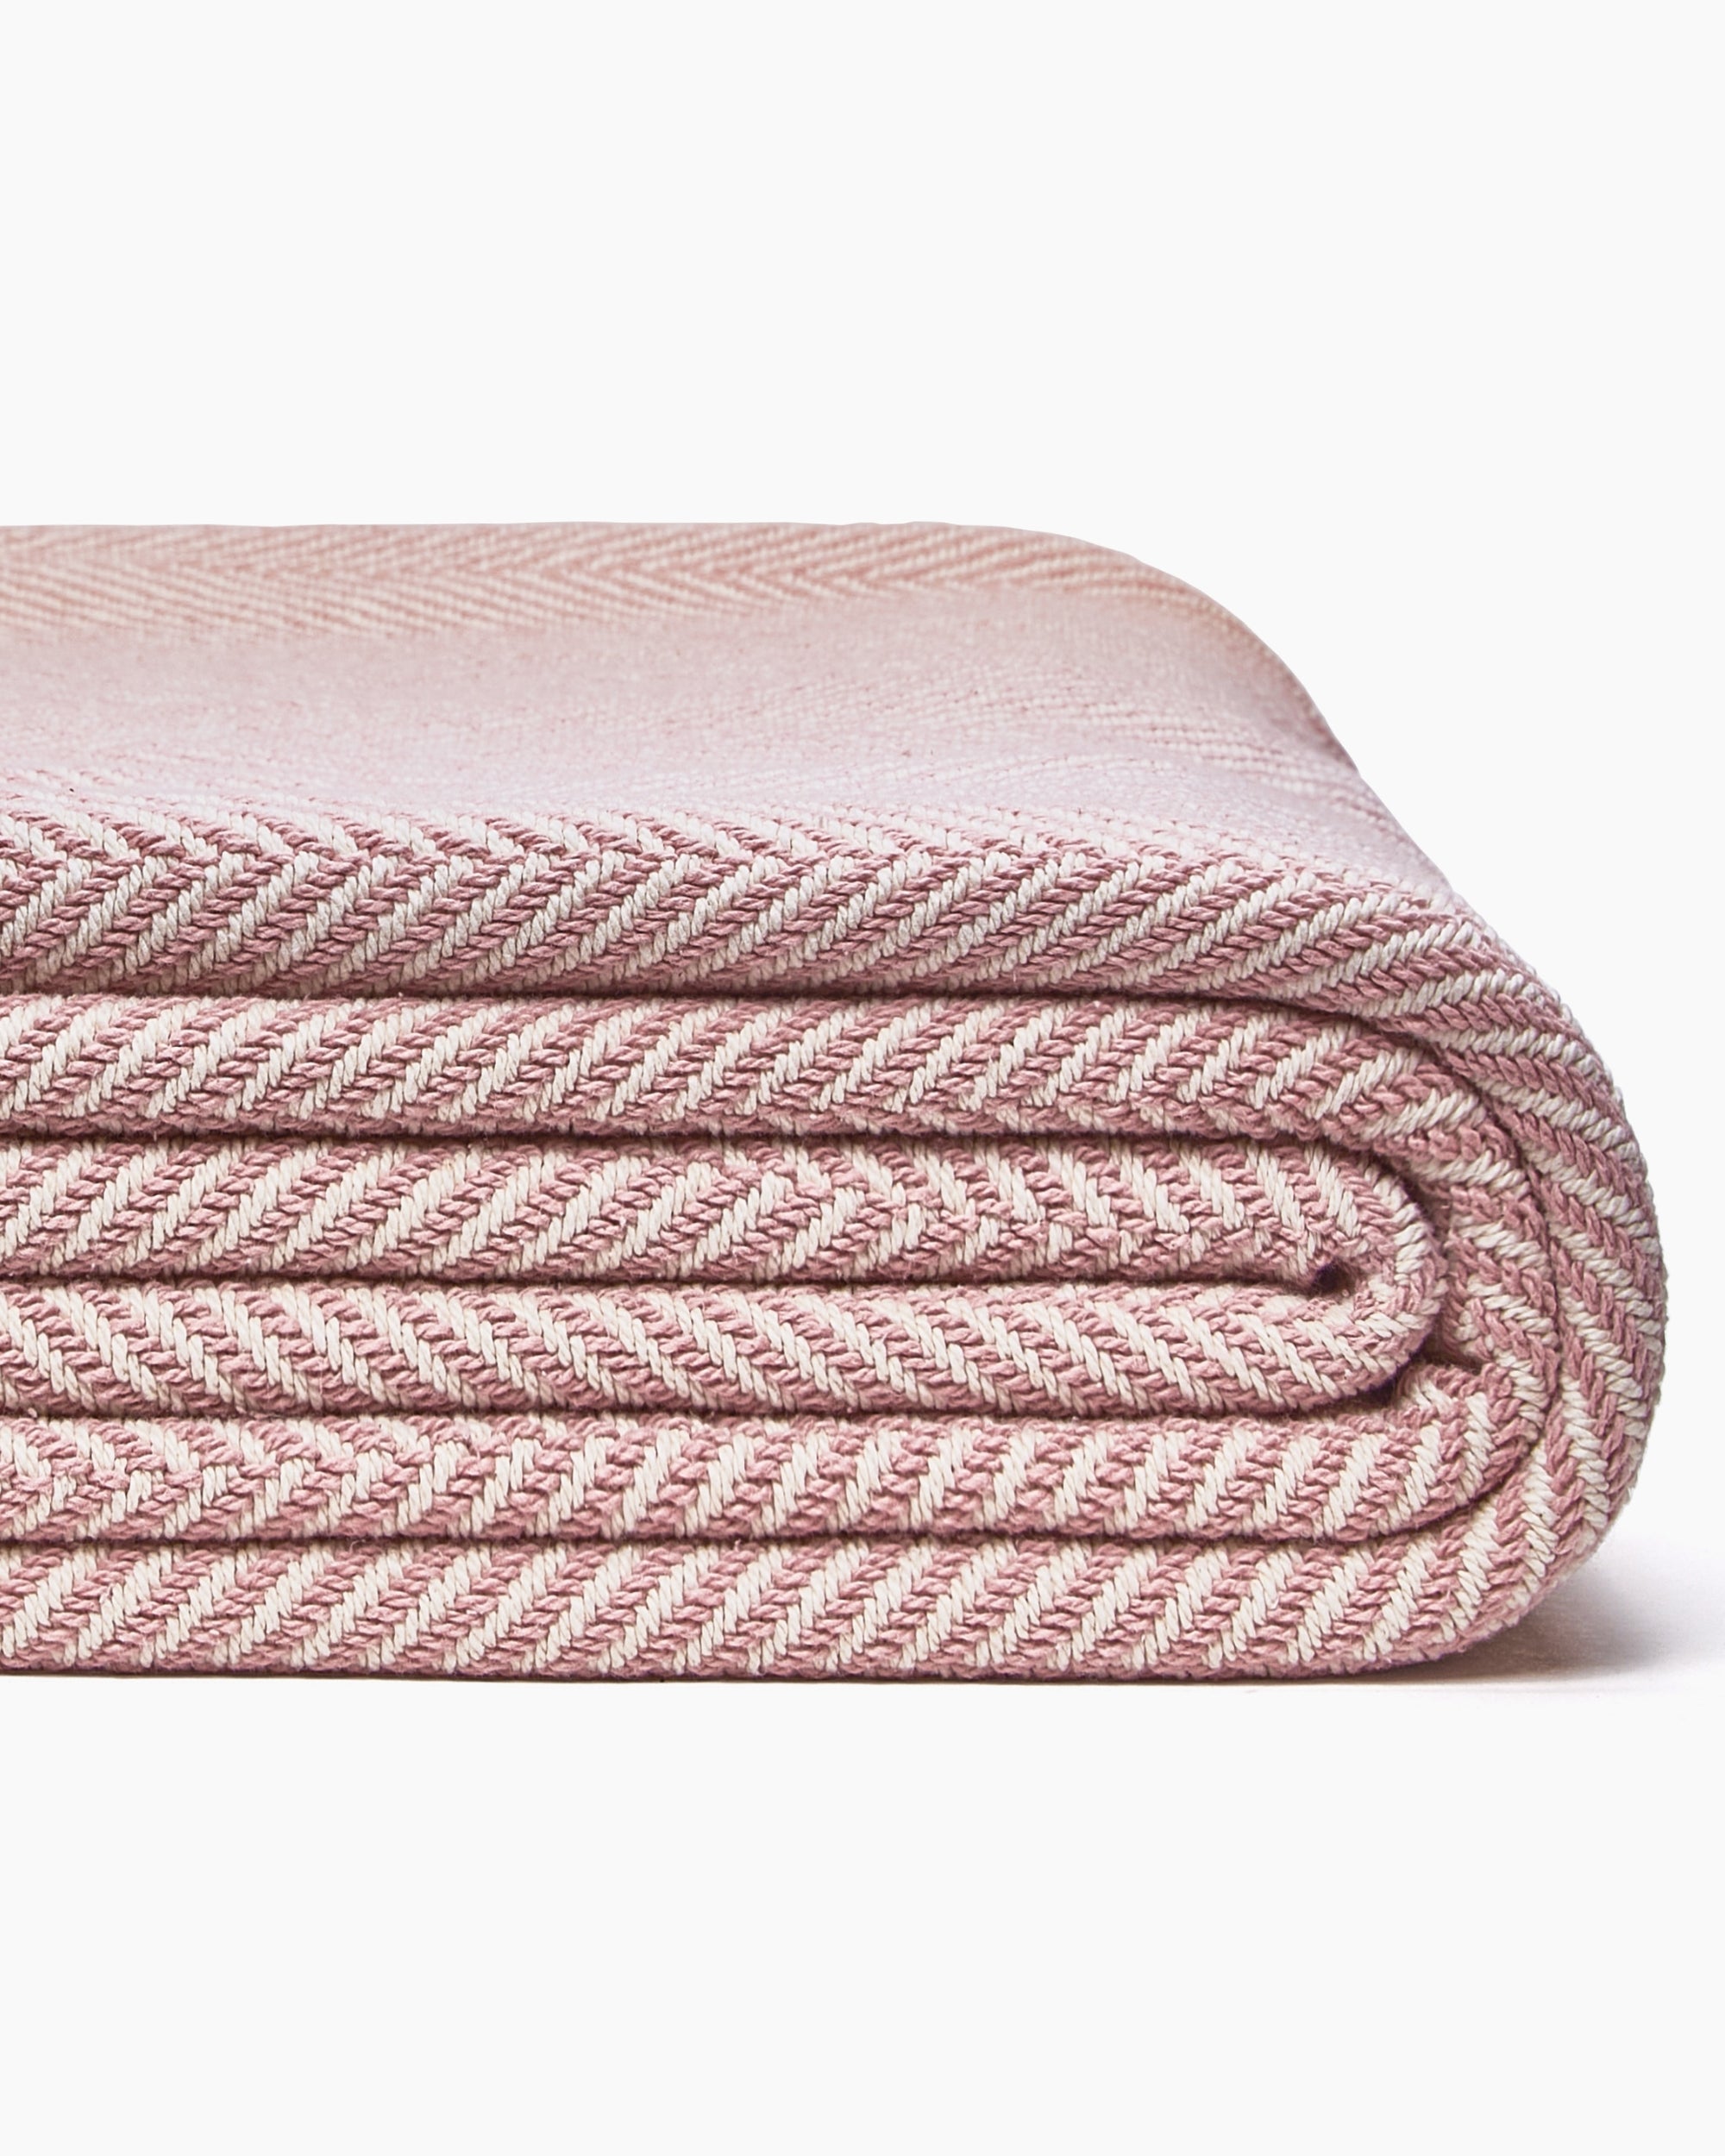 american made bed size blanket cover throw in pink desert blush